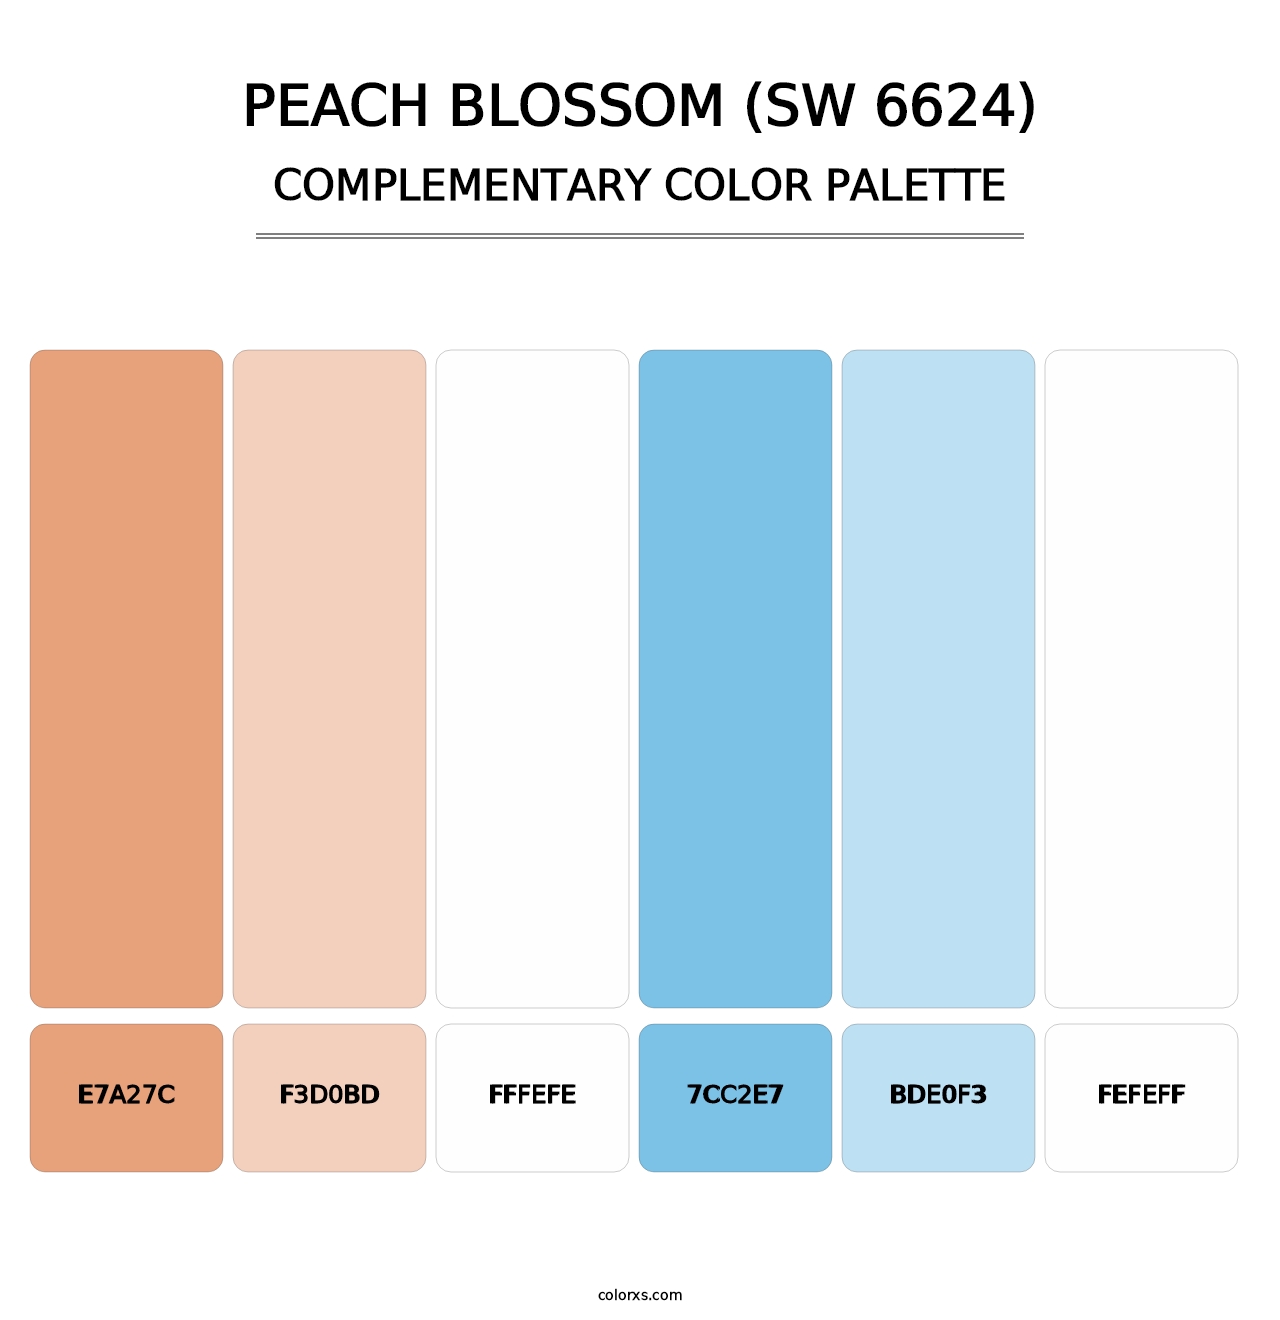 Peach Blossom (SW 6624) - Complementary Color Palette